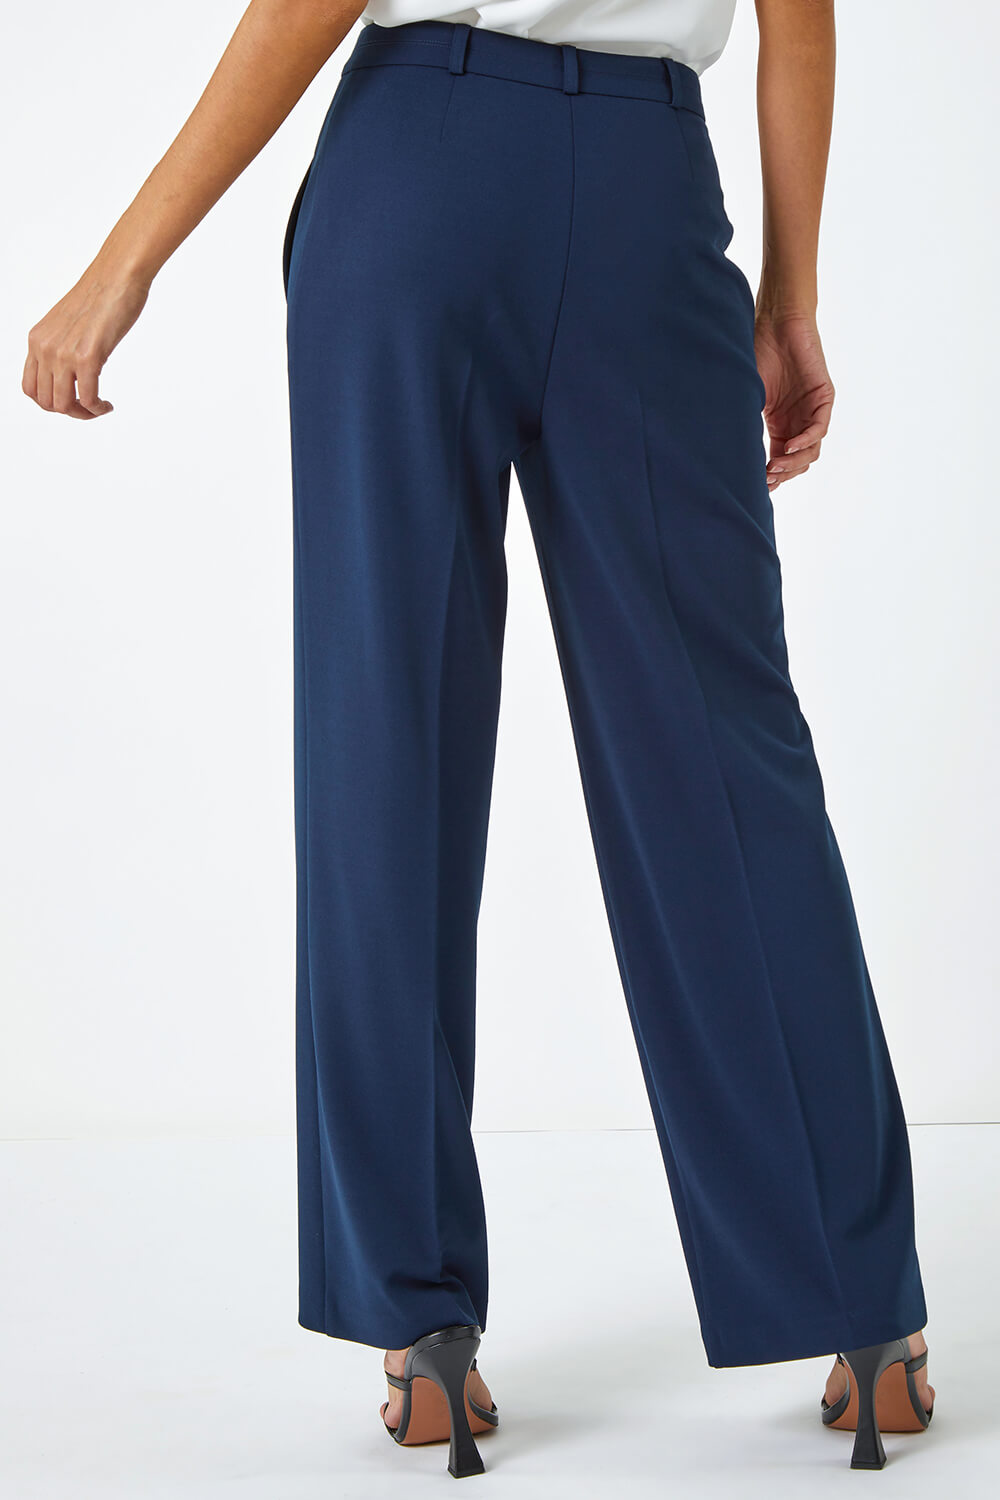 Navy  Wide Leg Premium Stretch Trousers, Image 2 of 5